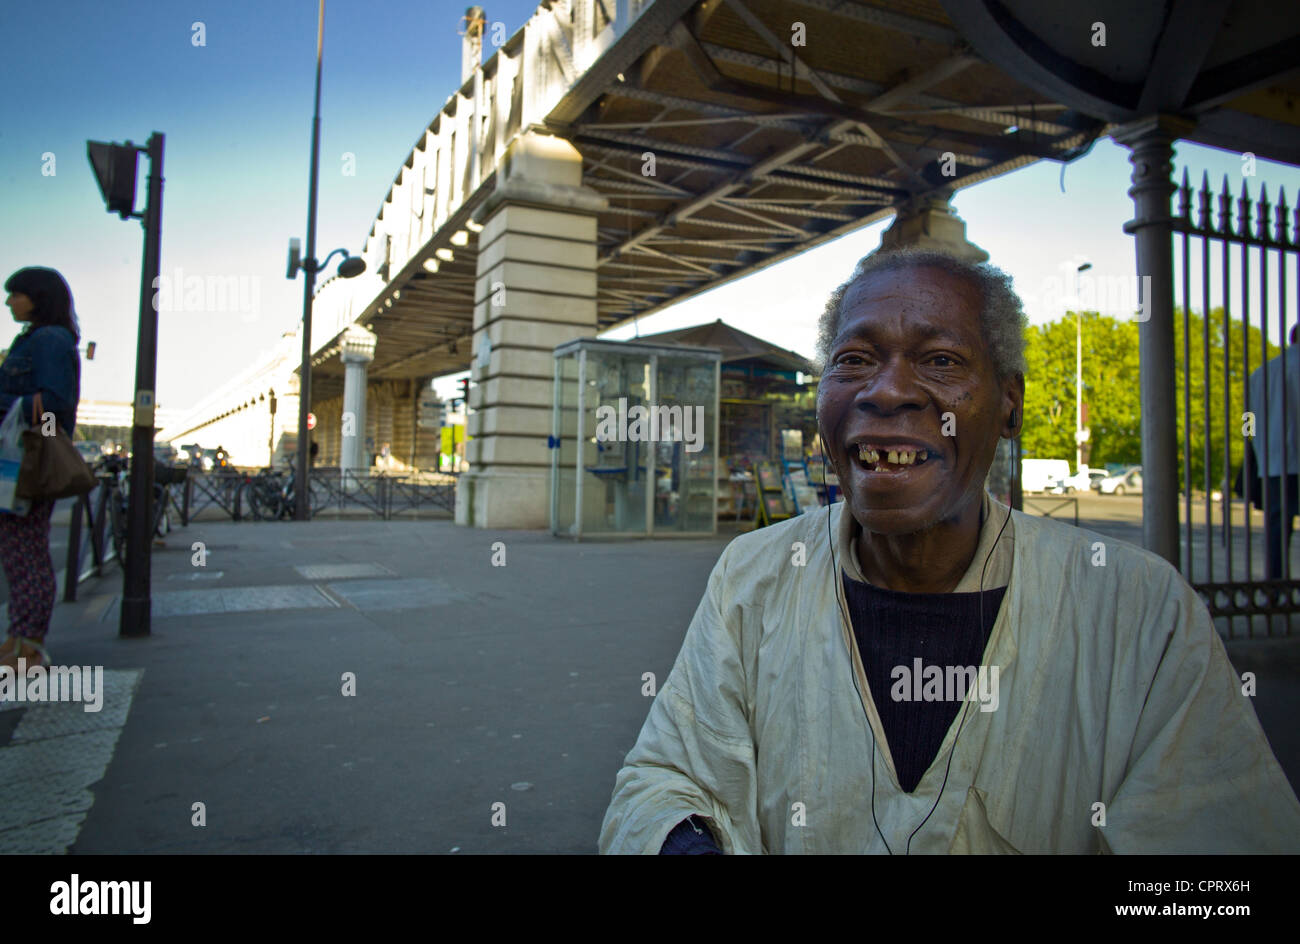 Hell in France . The homeless of the monuments, The old Frank the bridge of Bercy who lives on the sidewalk 'Quai de la Gare' Stock Photo